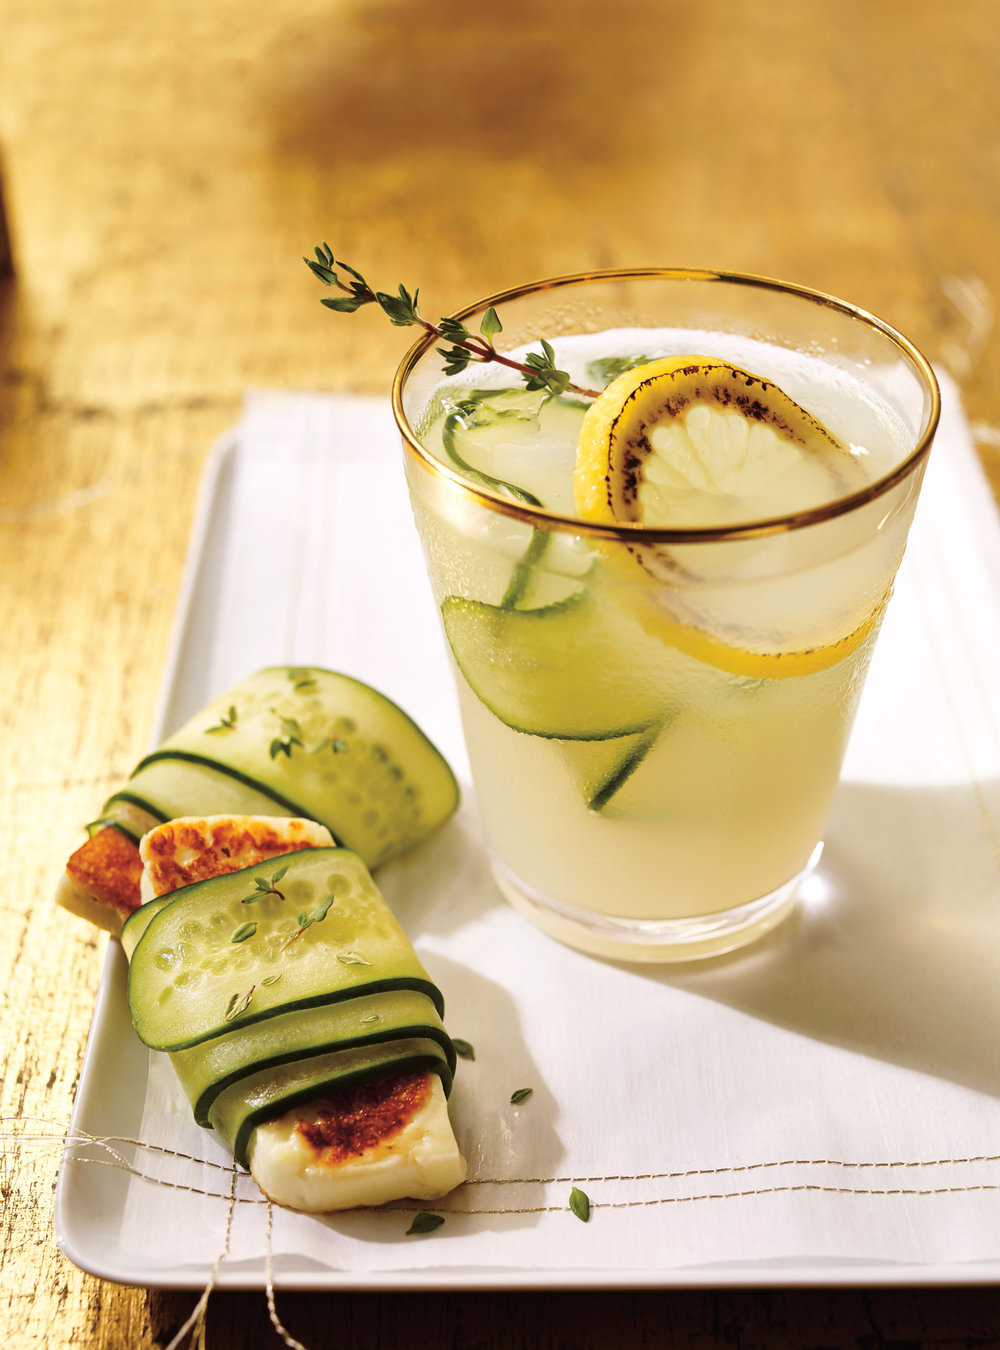 Grilled Cheese and Cucumber Hors-d’oeuvres